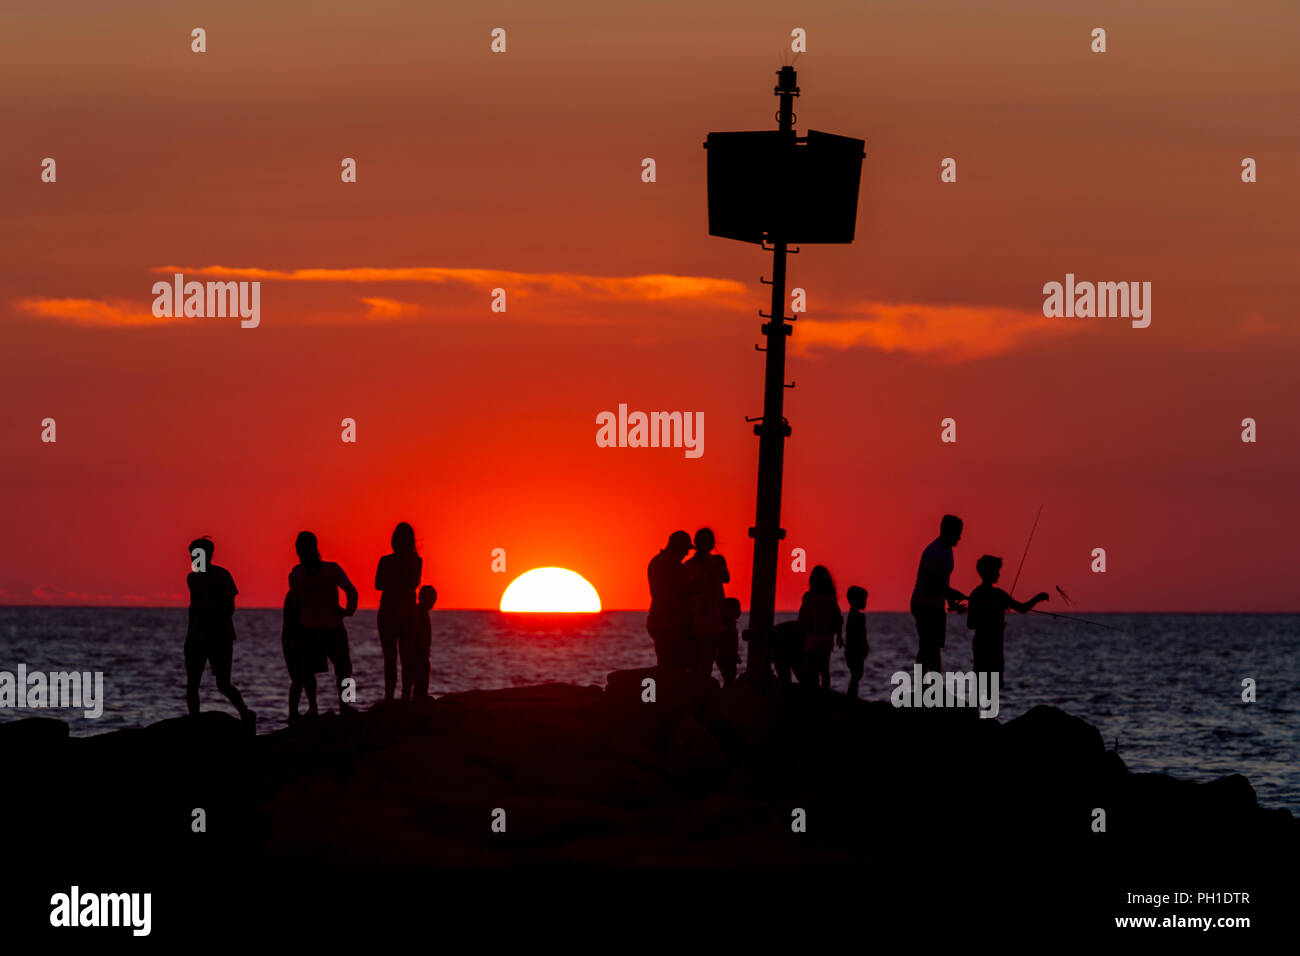 People stand on the jetty, some fishing, and watch the sunset at Menemsha Beach in Chilmark, Massachusetts on Martha's Vineyard. Stock Photo